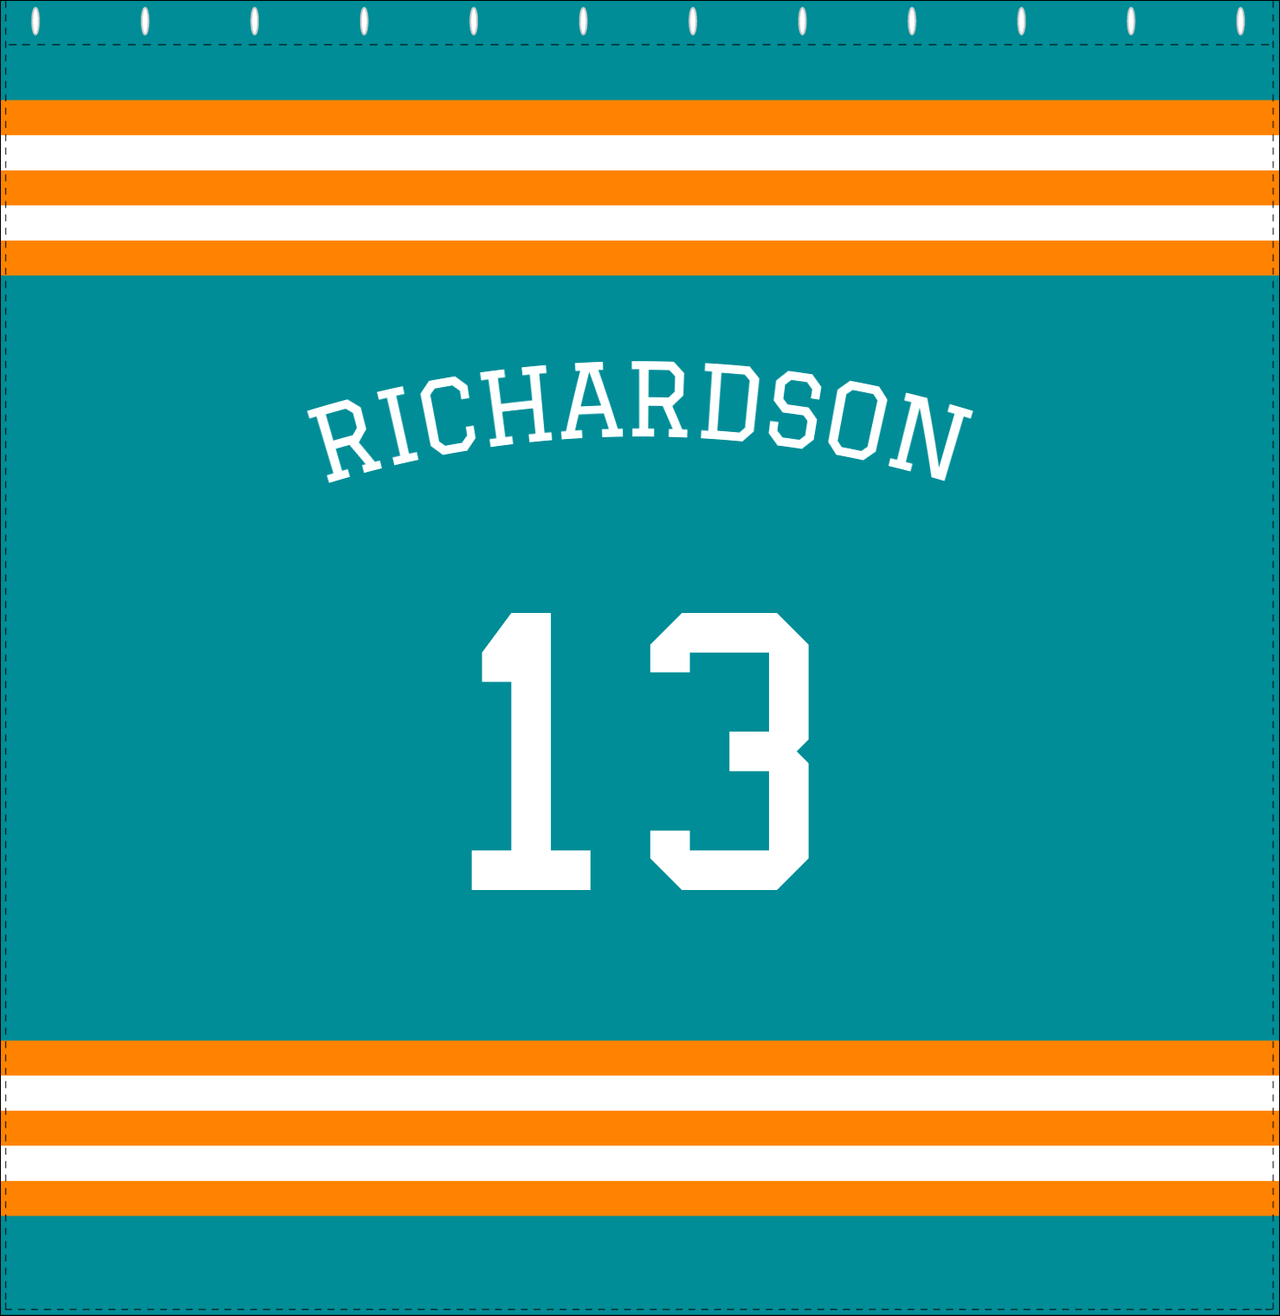 Personalized Jersey Number Shower Curtain with Arched Name - Teal & Orange - Double Stripe - Decorate View